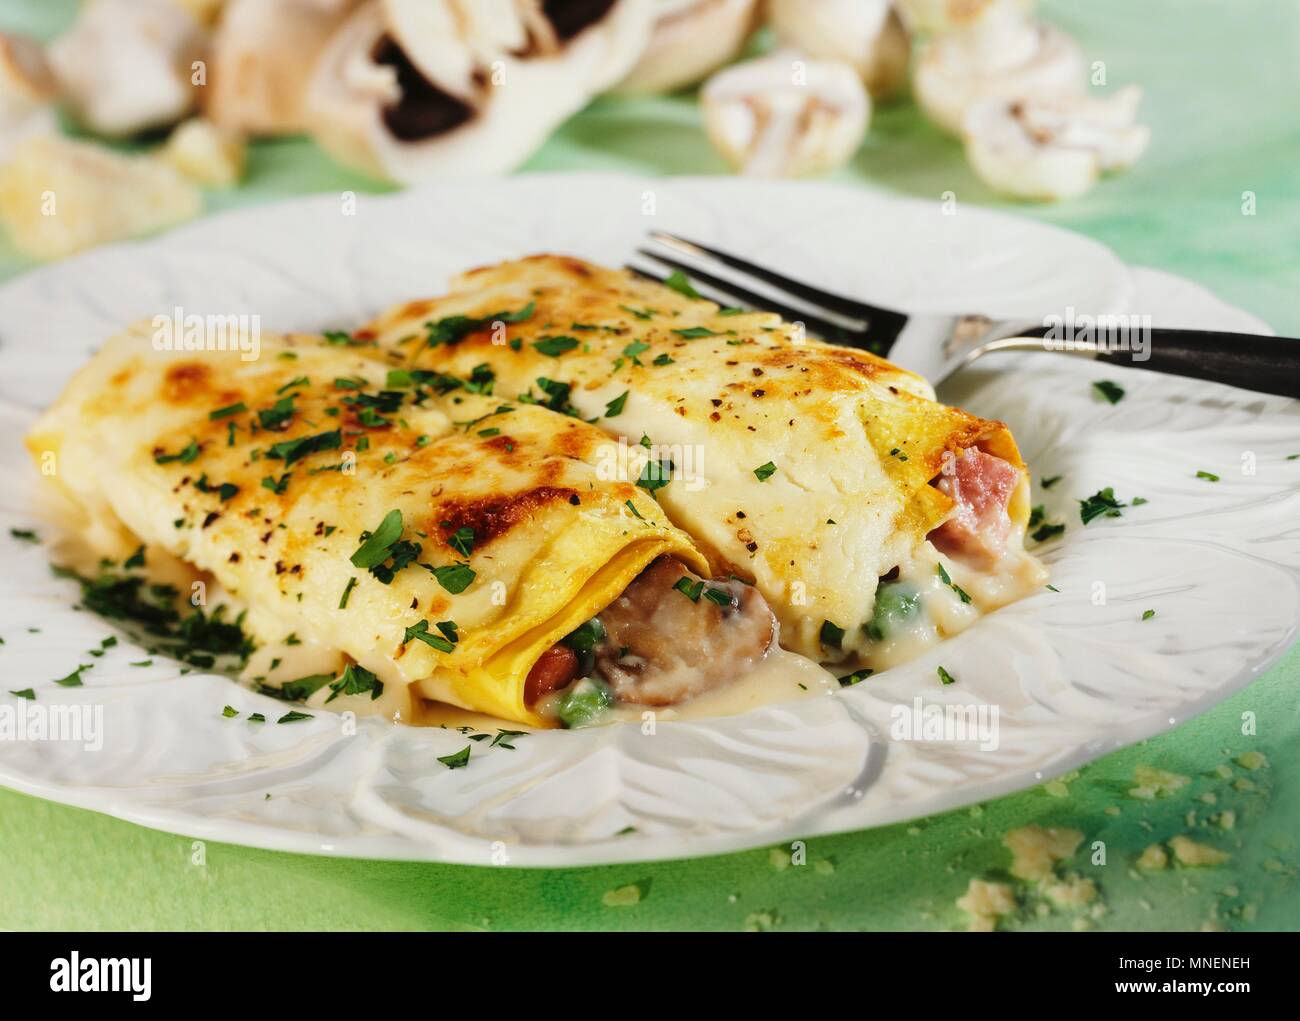 Pancakes filled with mushrooms, ham and cheese Stock Photo